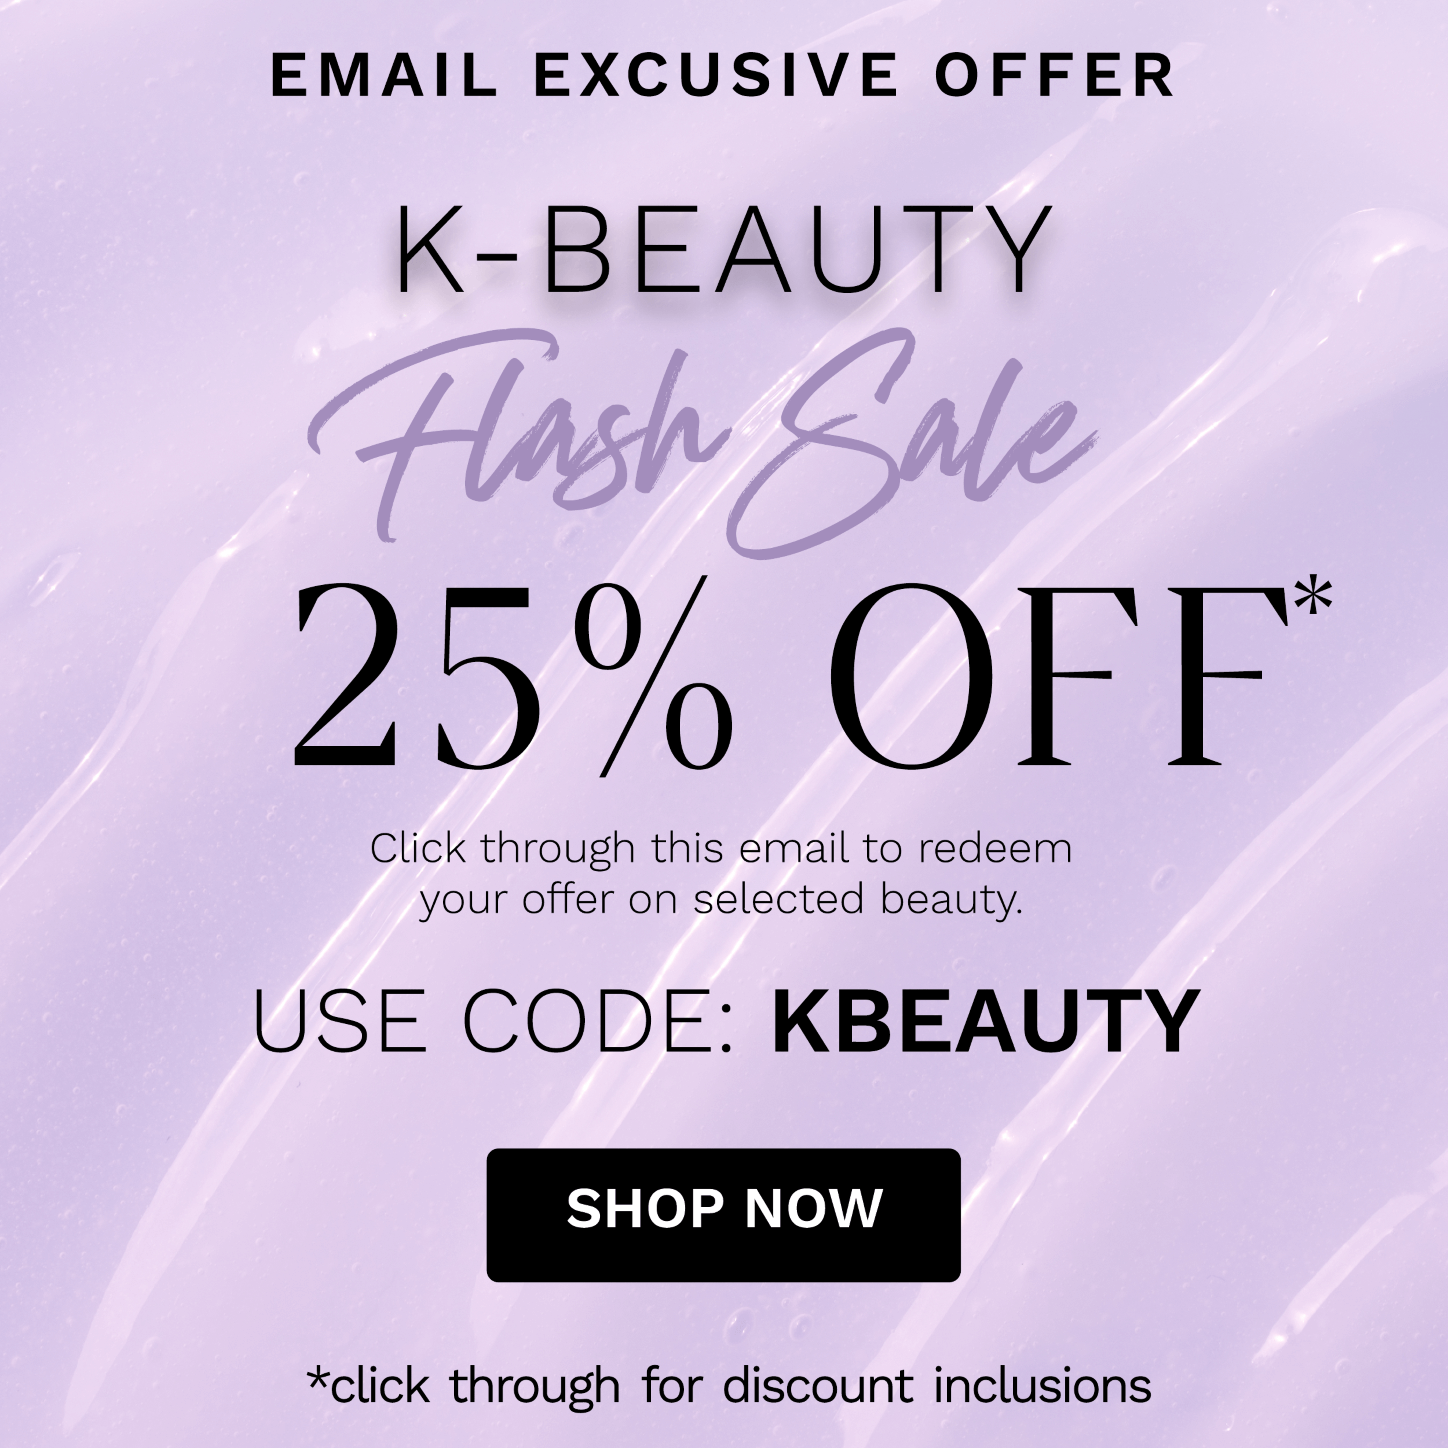 EMAIL EXCUSIVE OFFER K-BEAUTY 25% OFF Click through this email to redeem your offer on selected beauty. USE CODE: KBEAUTY SHOP NOW *click through for discount inclusions 